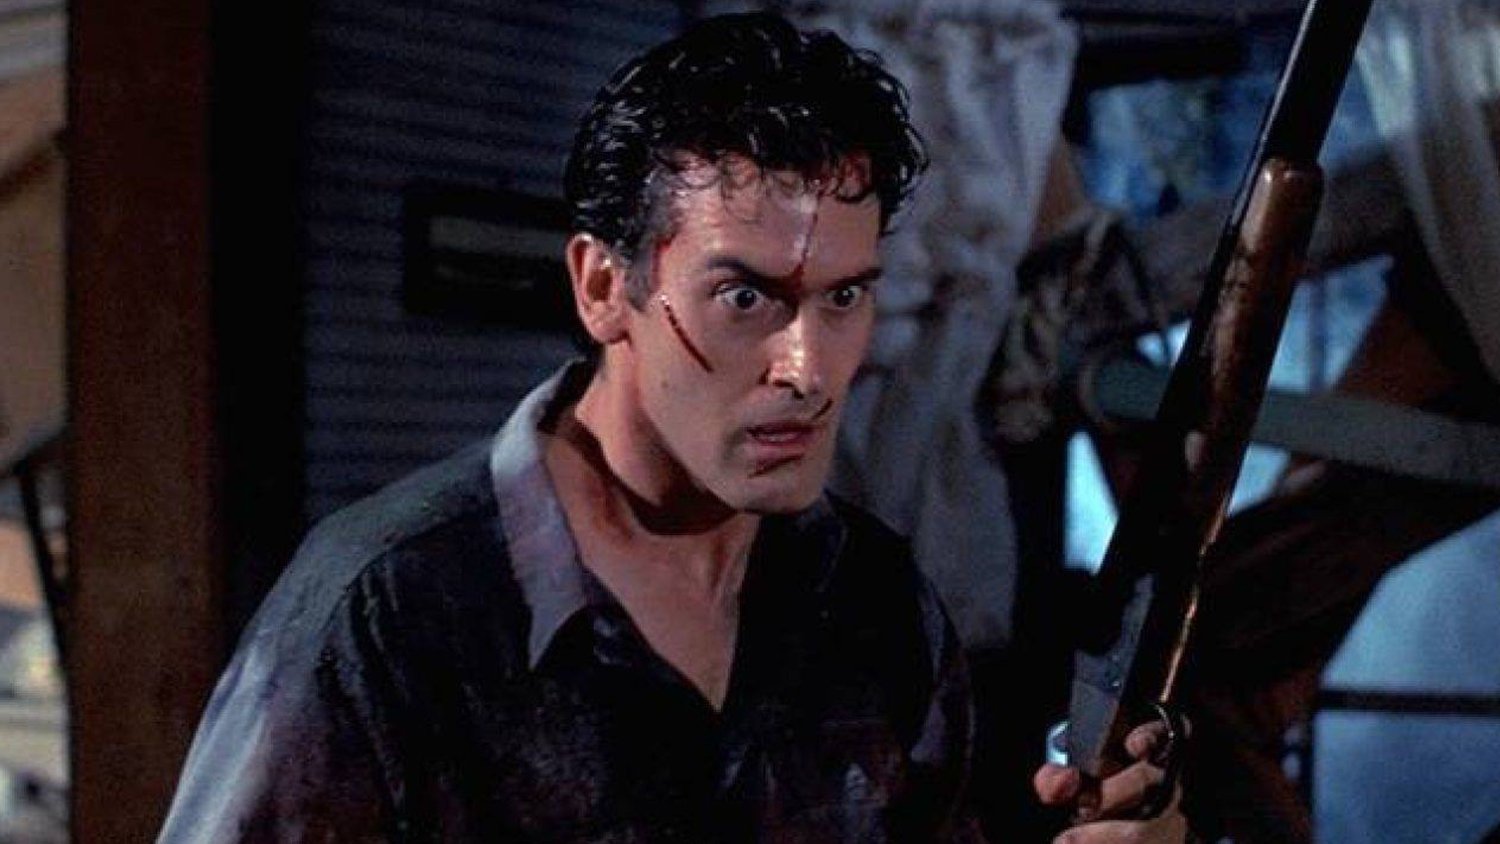 Sam Raimi Shares How EVIL DEAD Got Its Title and Why He Thinks the Title Is "So Stupid"